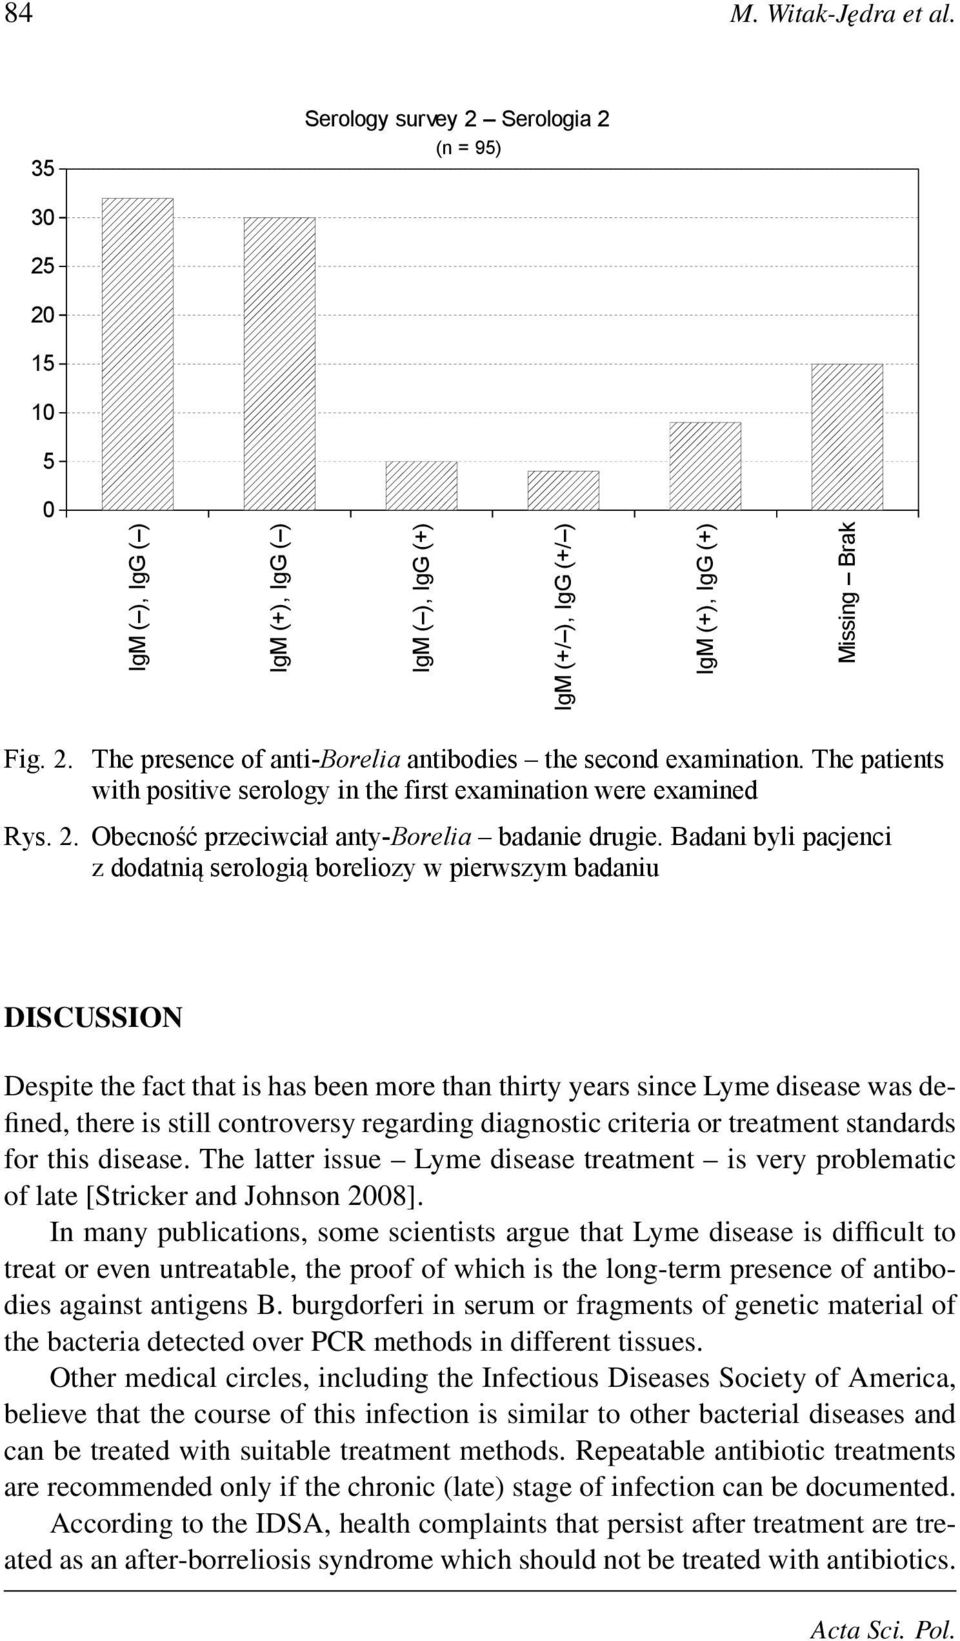 Badani byli pacjenci z dodatnią serologią boreliozy w pierwszym badaniu DISCUSSION Despite the fact that is has been more than thirty years since Lyme disease was defined, there is still controversy